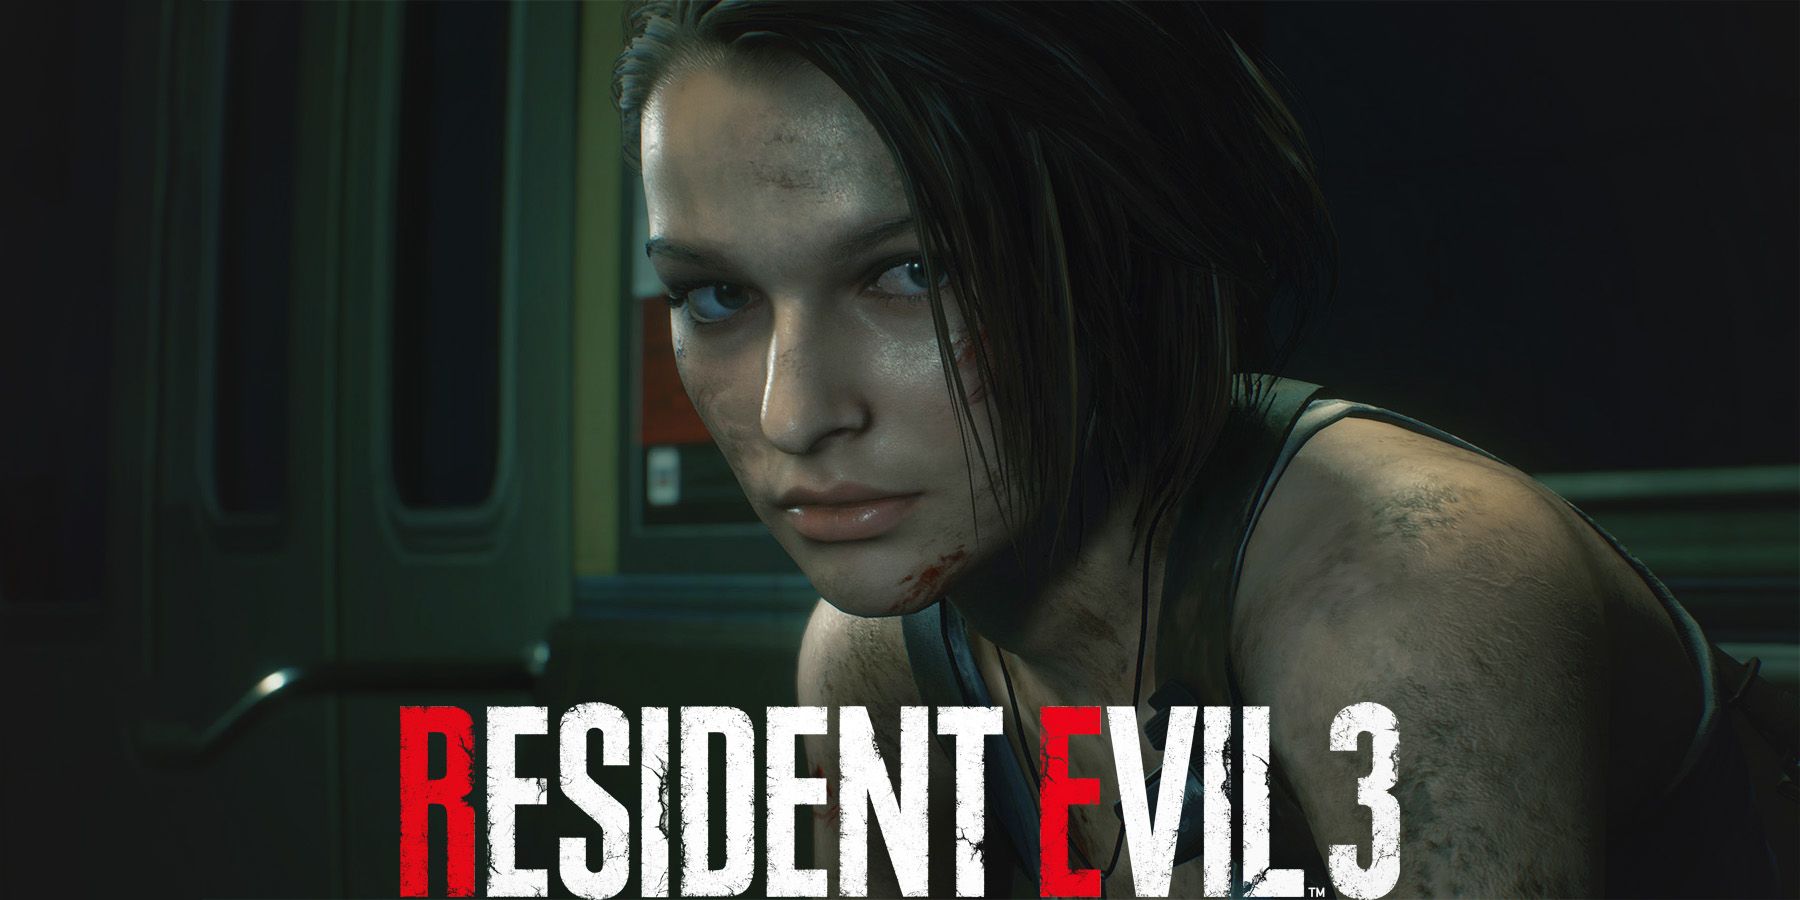 Resident Evil 3 remake Jill Valentine sitting in train close-up with game logo